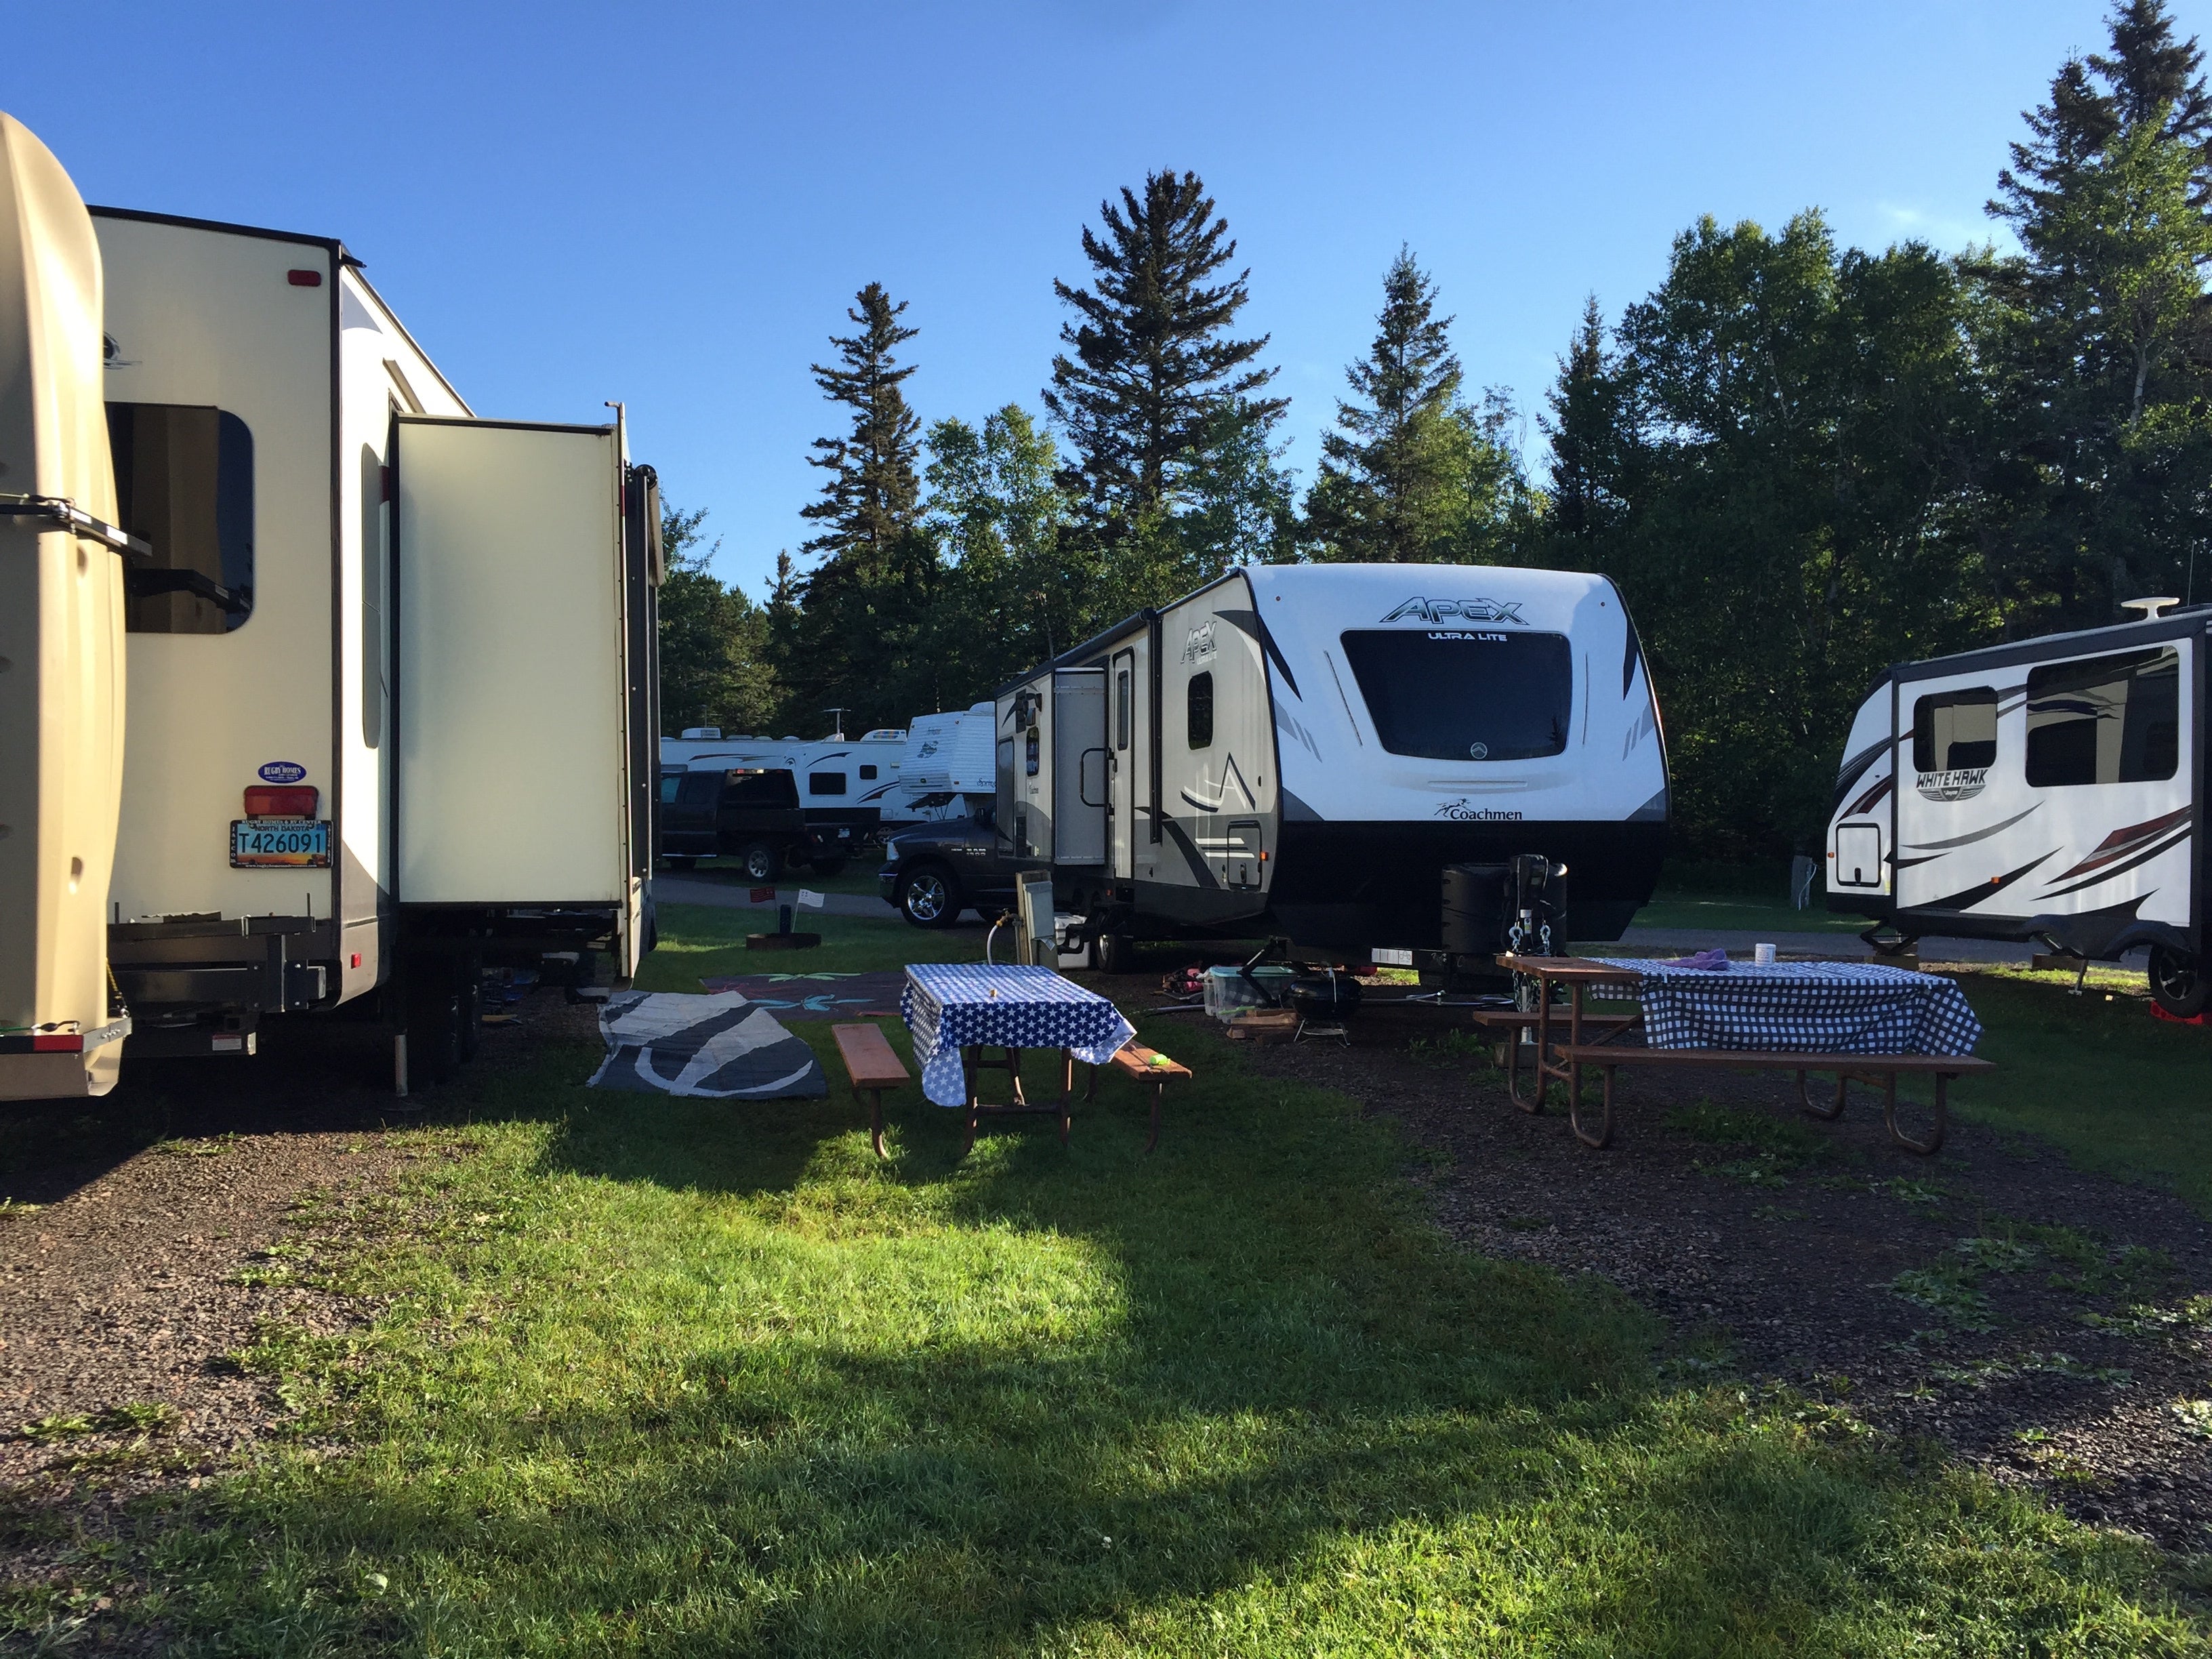 Camper submitted image from Burlington Bay Campground - 1